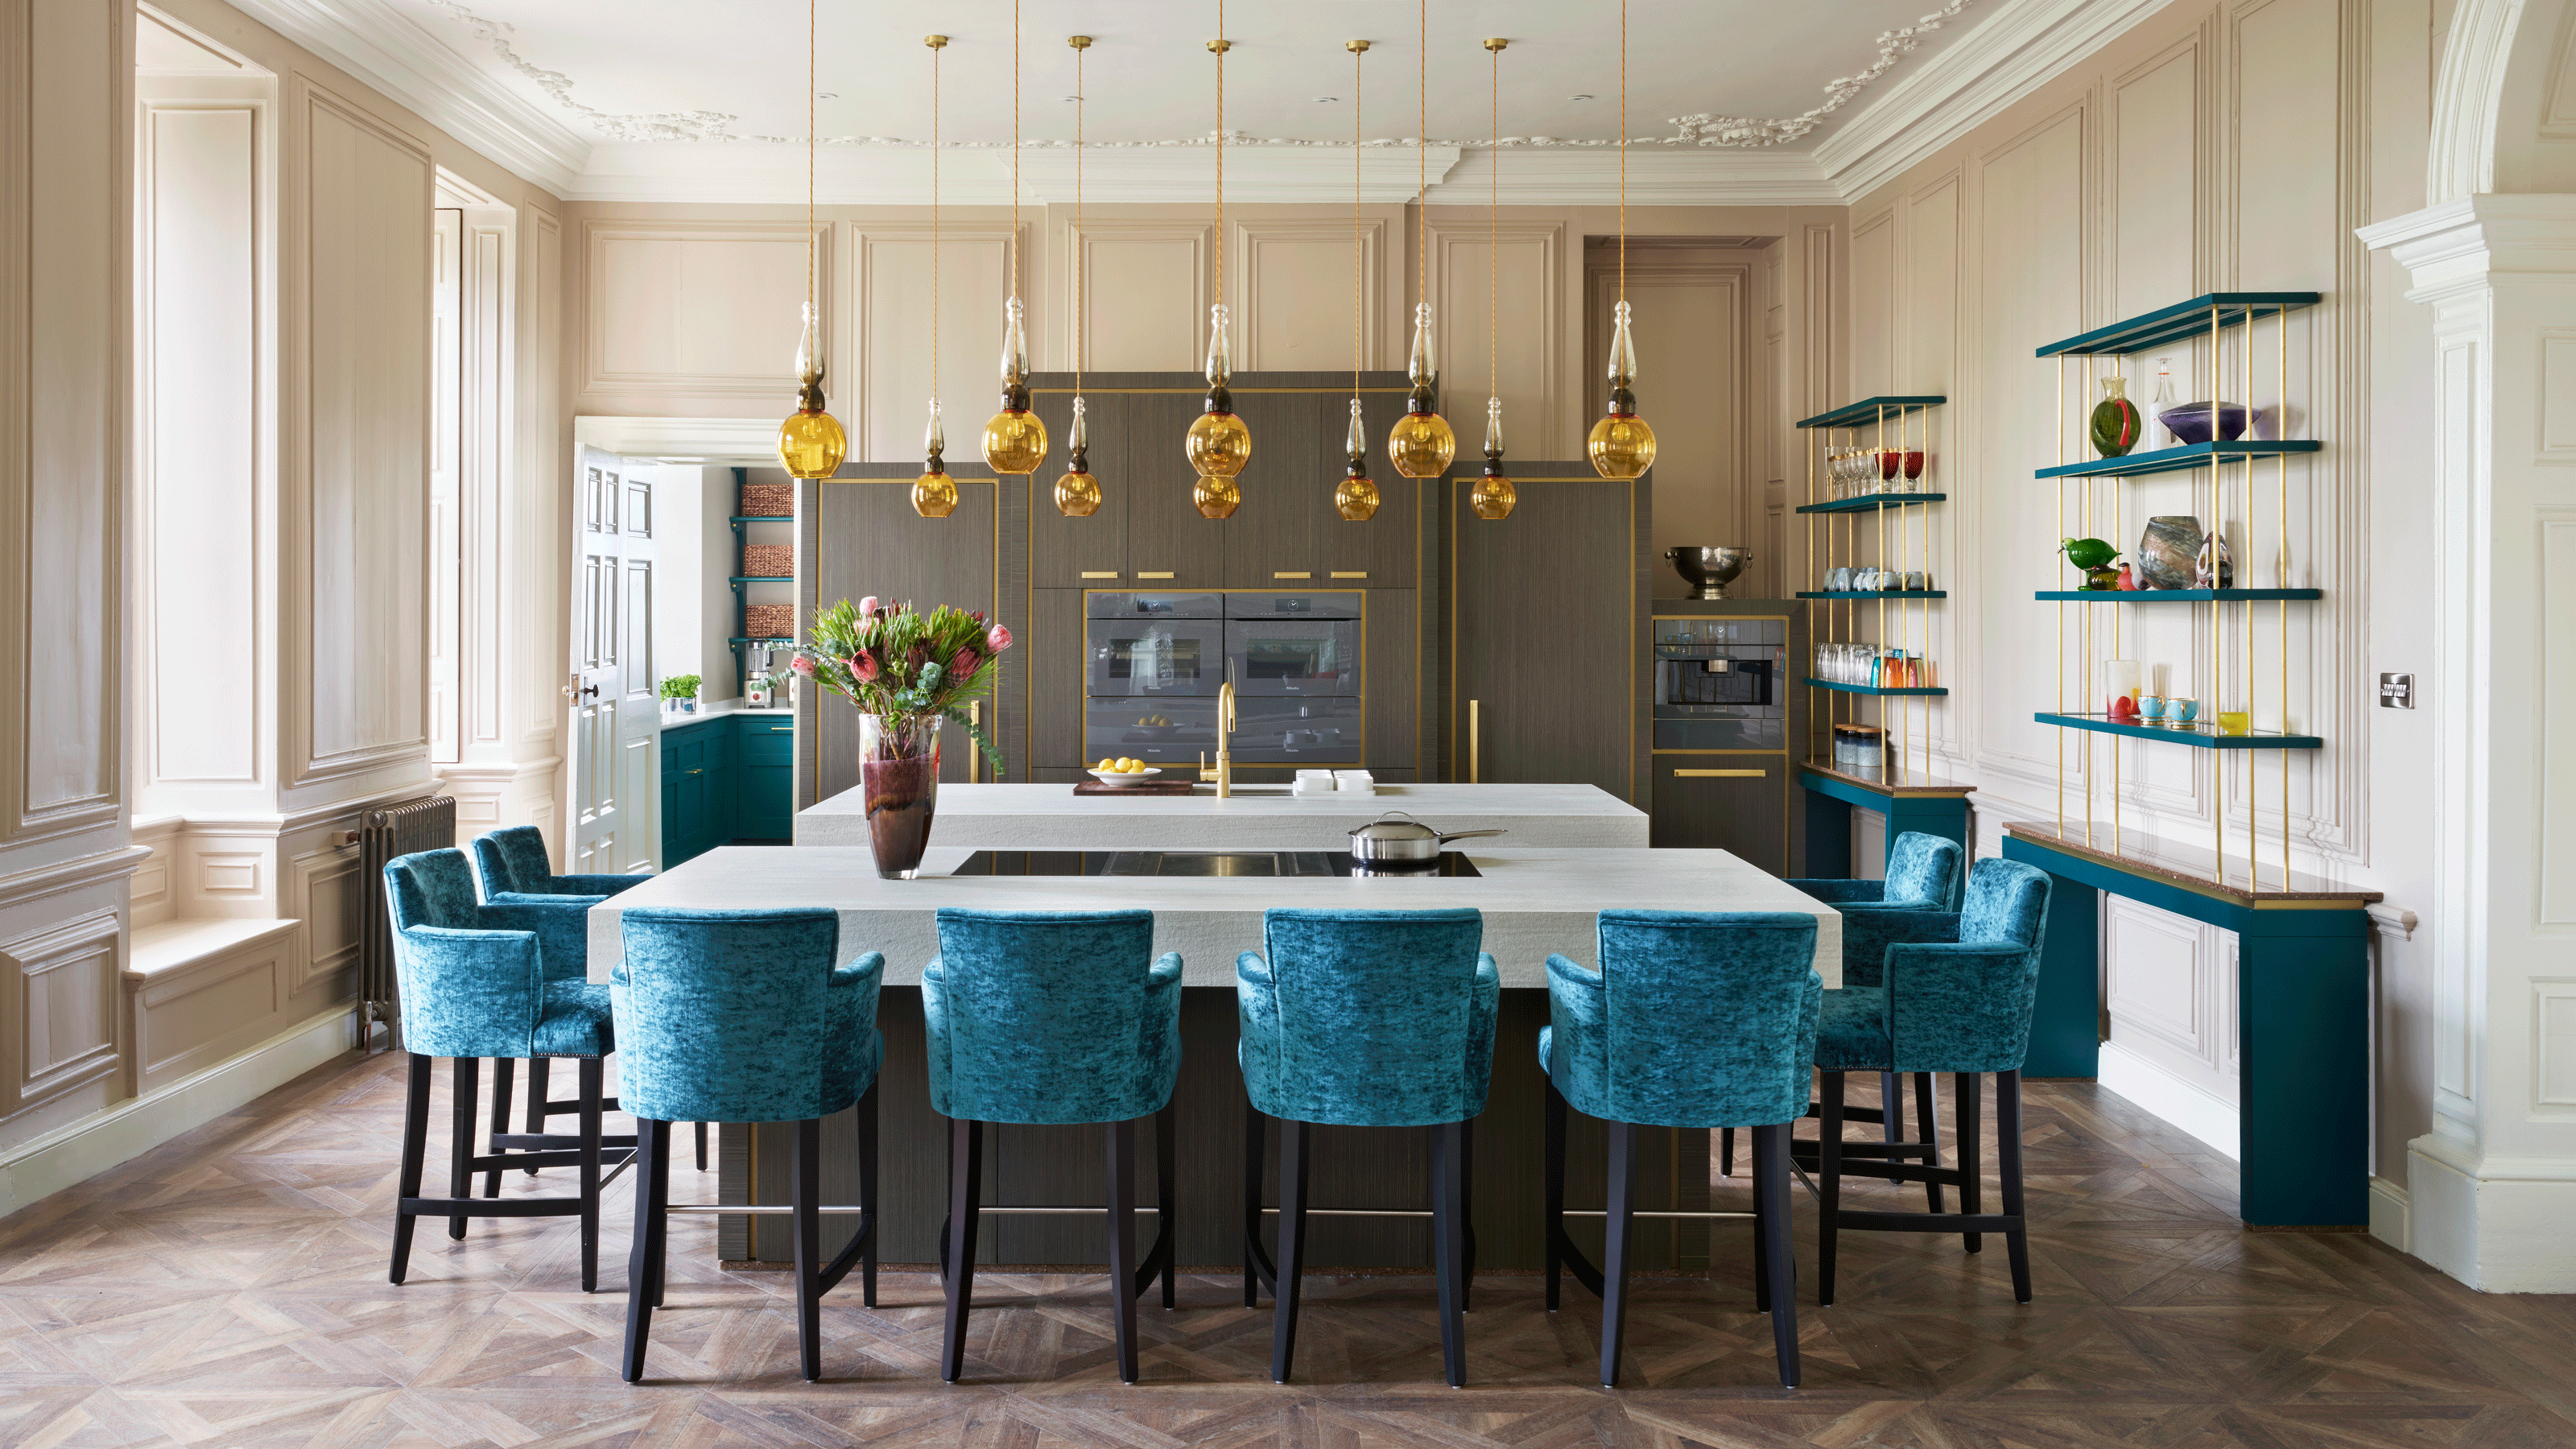 Wooden parquet illustrating the best kitchen flooring in a large cream room with blue velvet chairs around an island with pendant lighting.